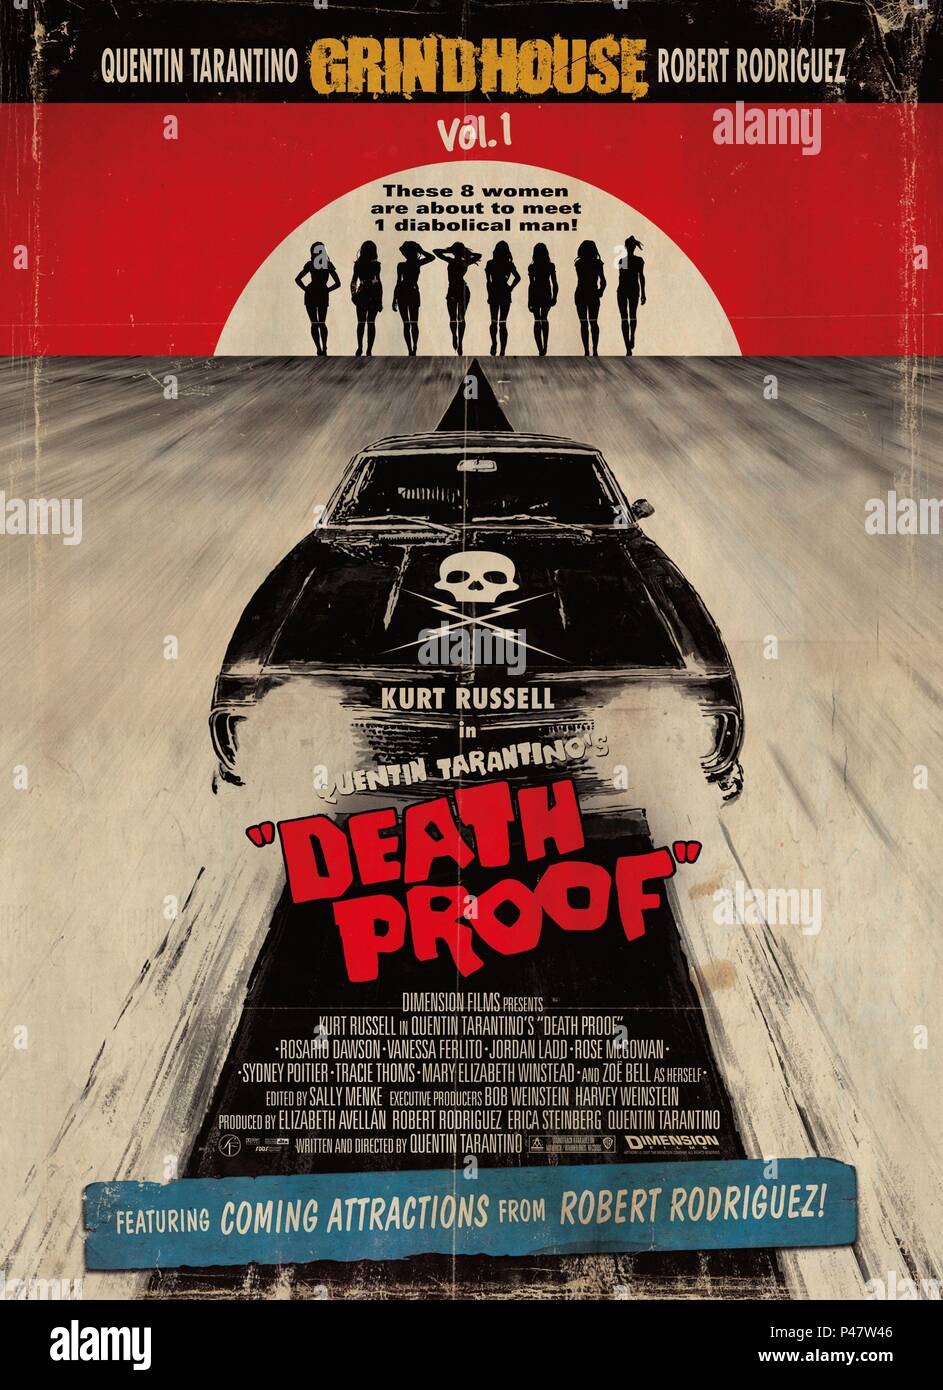 Original Film Title: GRINDHOUSE-DEATH PROOF.  English Title: GRINDHOUSE.  Film Director: QUENTIN TARANTINO.  Year: 2007. Credit: DIMENSION FILMS/A BAND APART/BIG TALK PRODUCTIONS/DARTMOUTH / Album Stock Photo